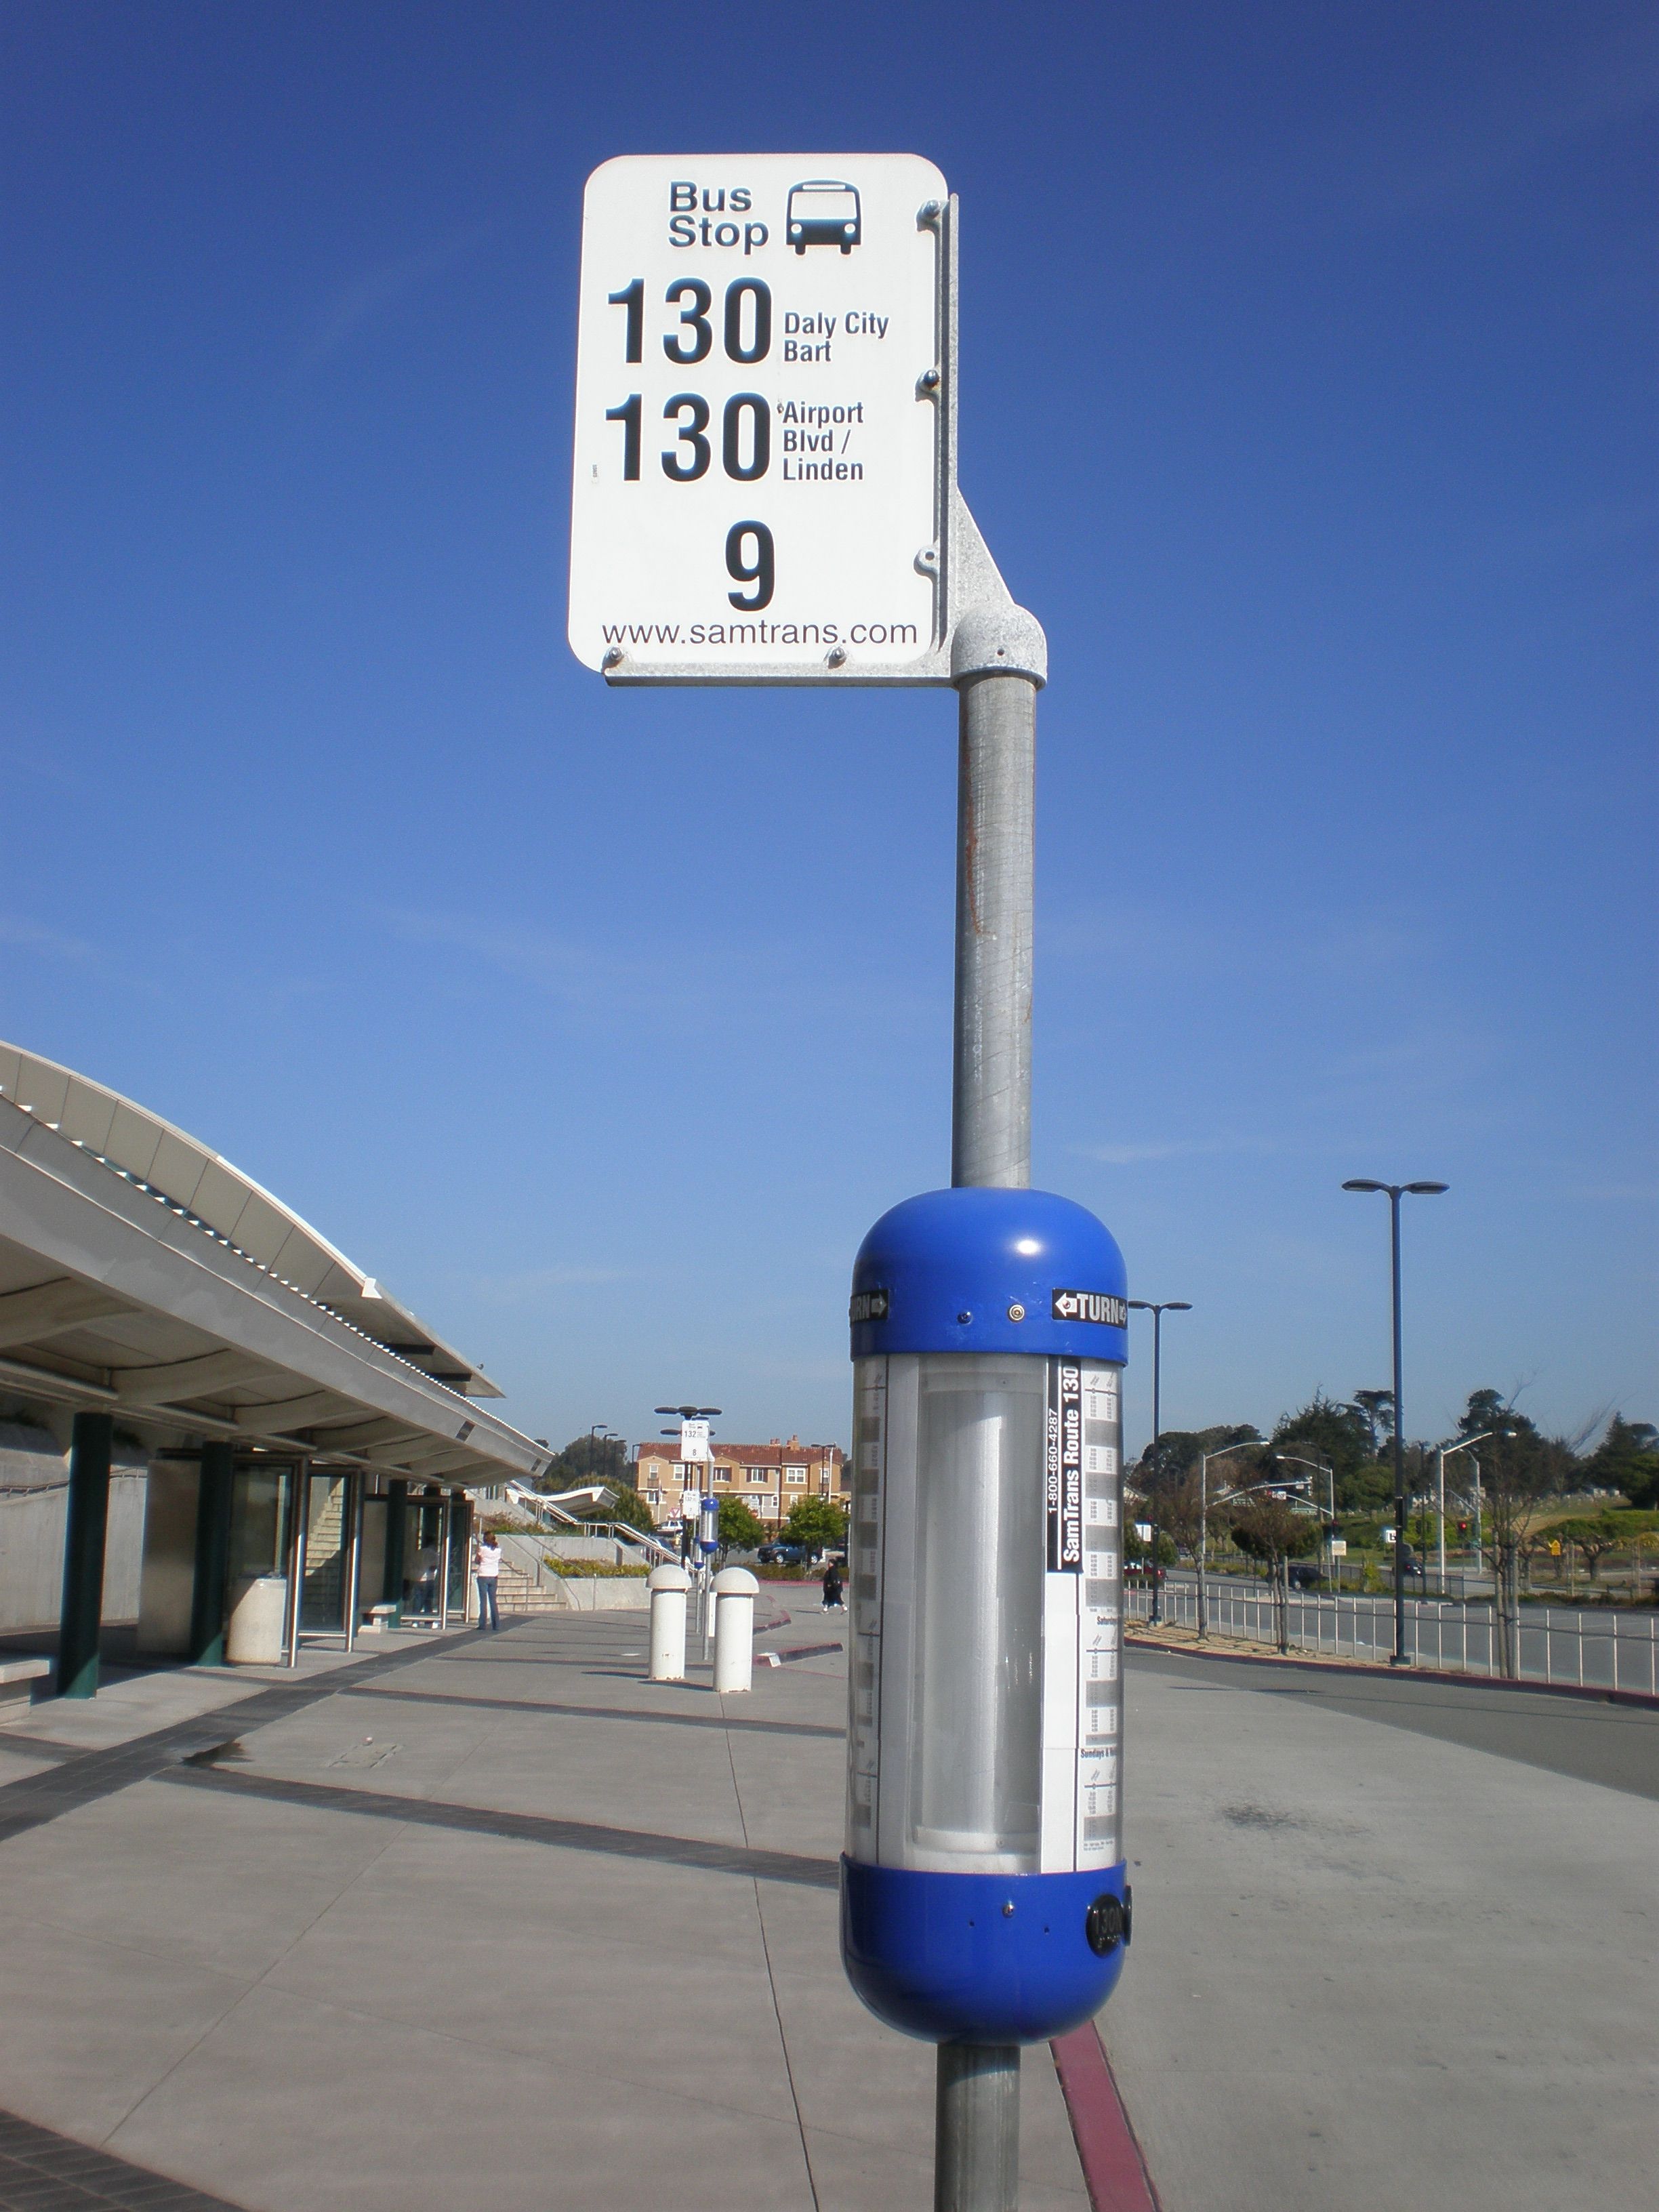 Click image for larger version  Name:	SSF_BART_SamTrans_eastern_bus_stop_sign_and_schedule.JPG Views:	0 Size:	768,5 kB ID:	1999336